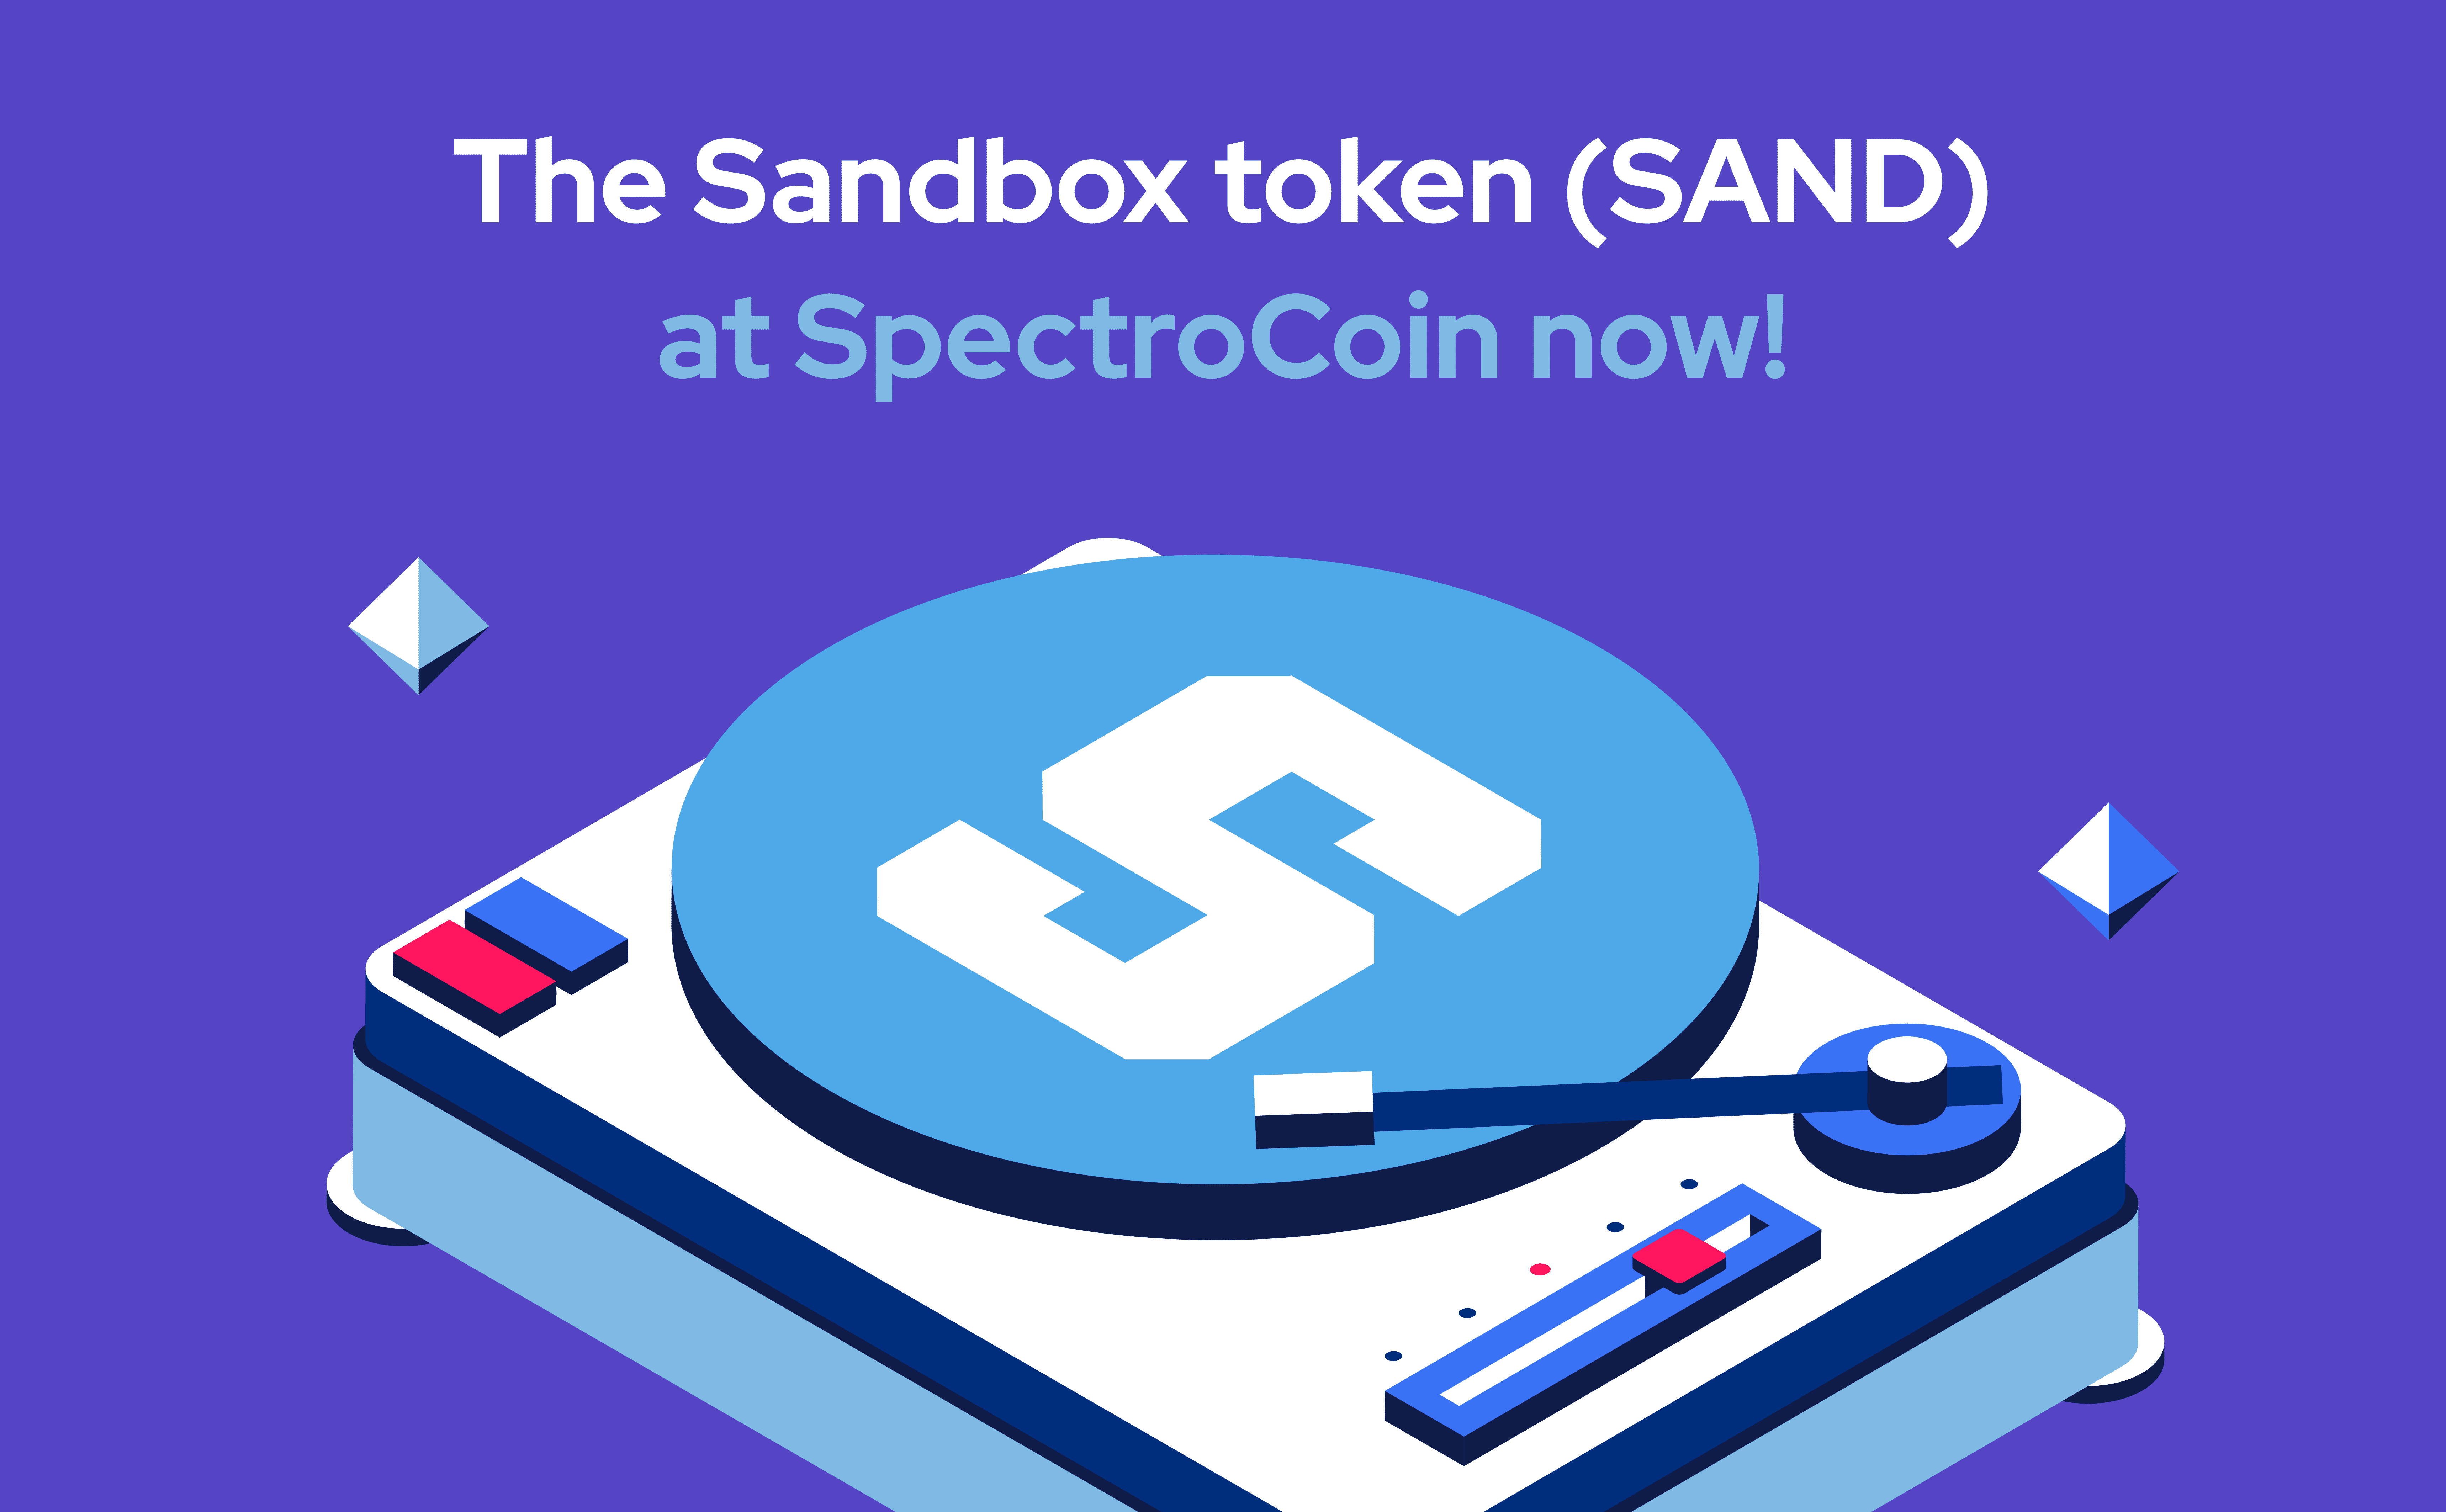 Withdraw, trade and accept The Sandbox token (SAND)